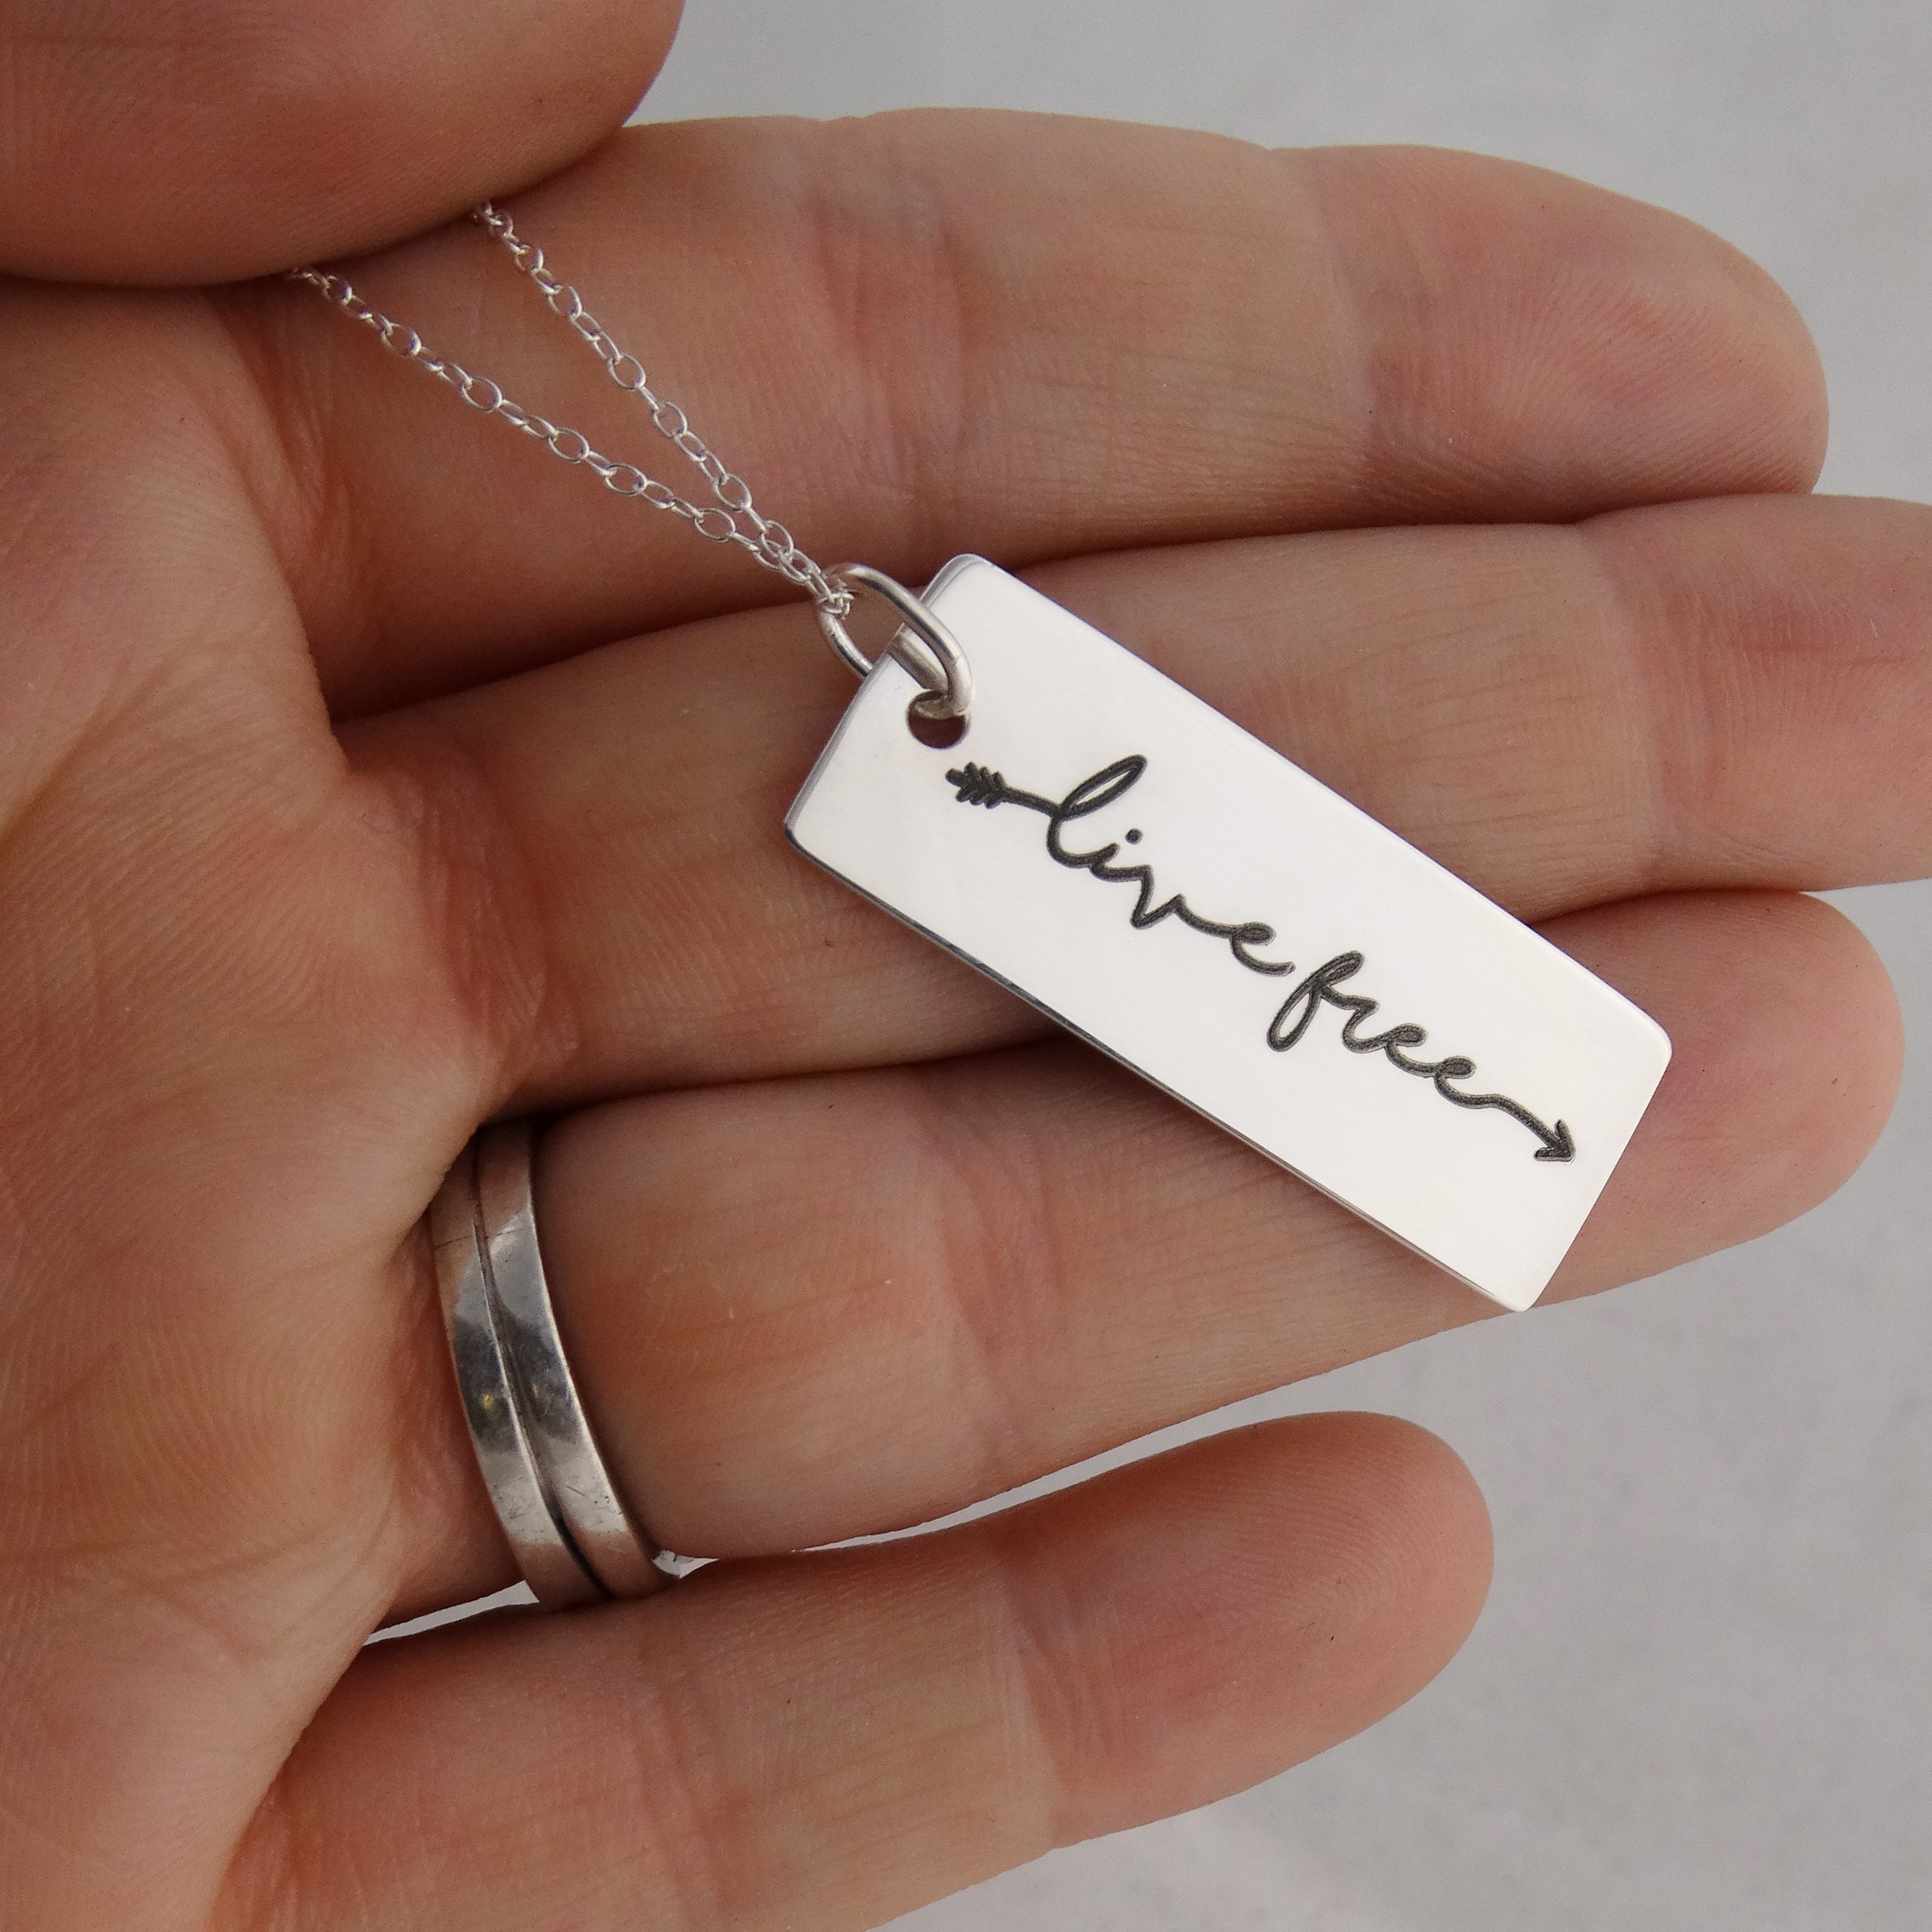 Live Free Arrow Pendant Necklace - 925 Sterling Silver - Engraved Inspirational Spiritual Jewelry - 18 Chain